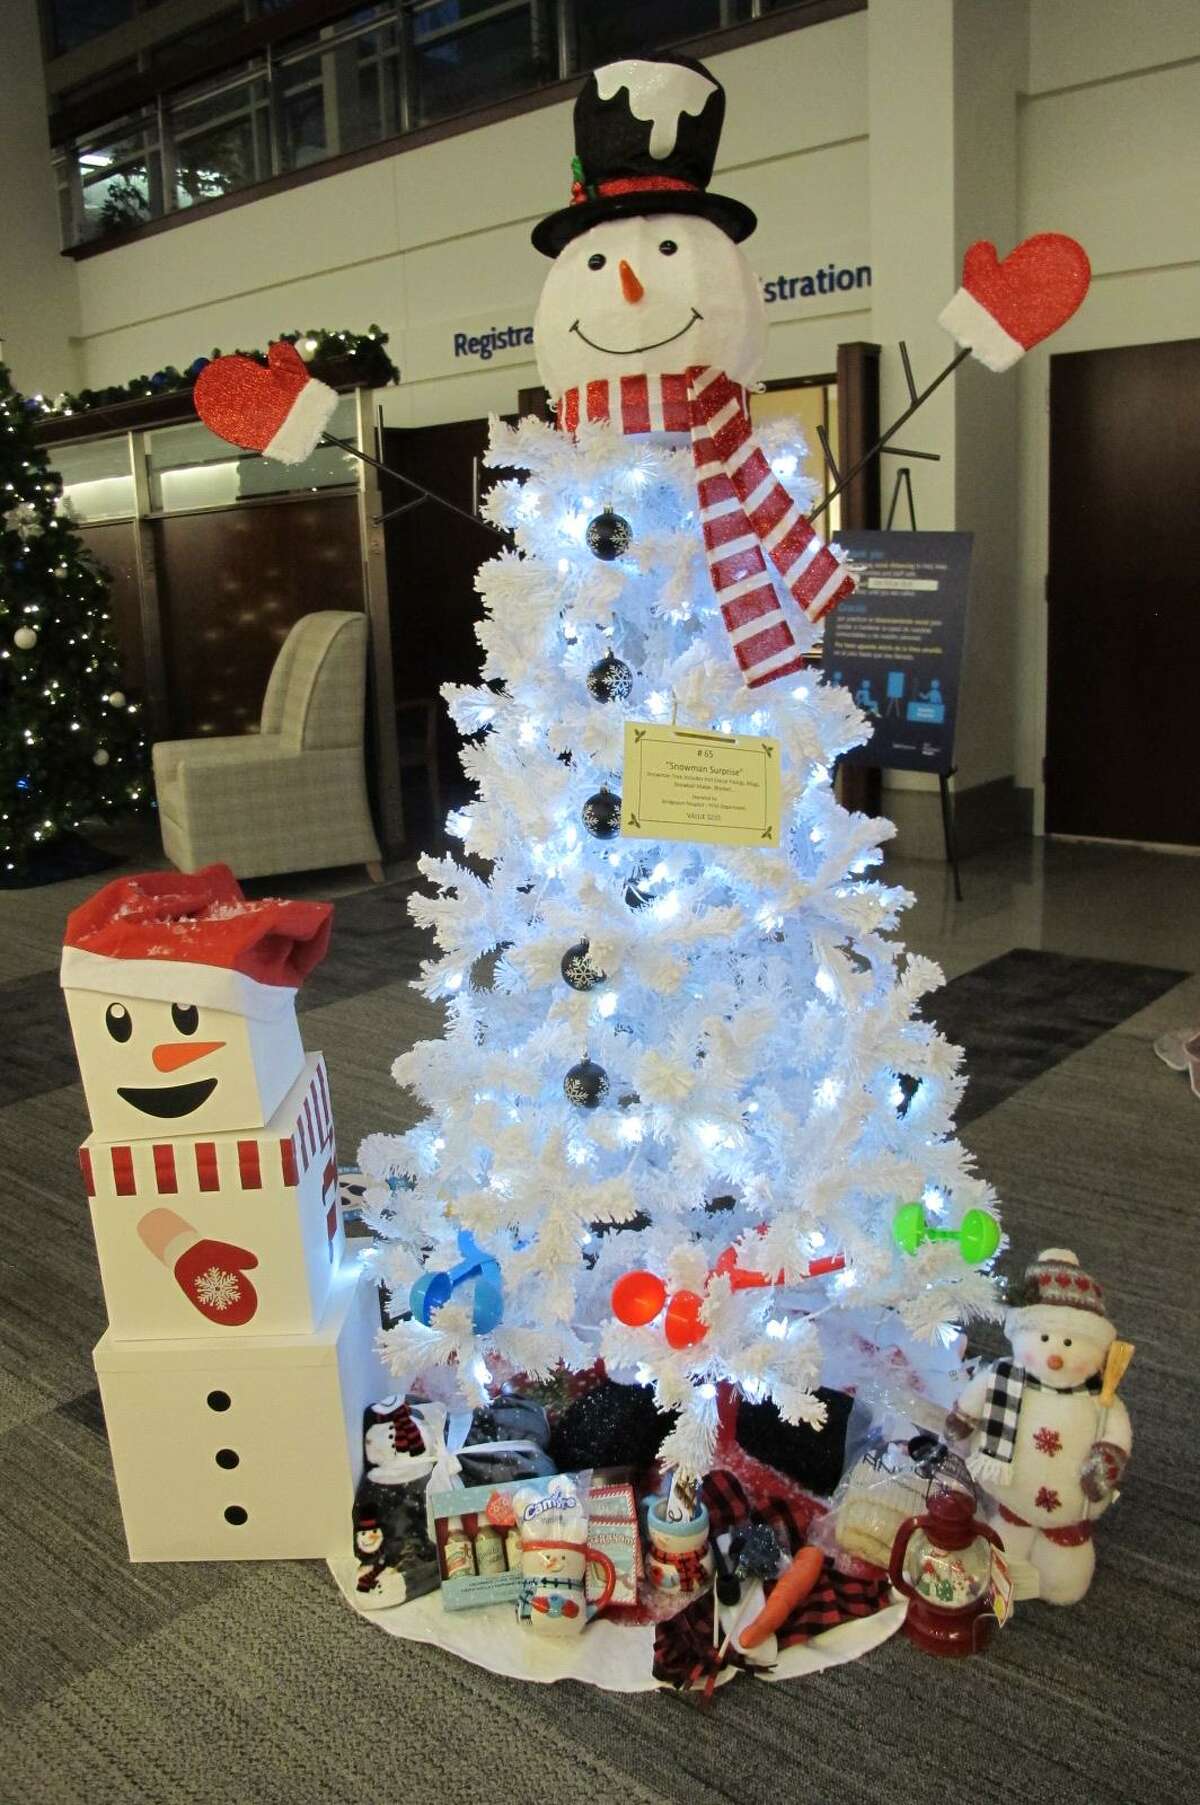 The Celebration of Trees event is taking place virtually this year at the Bridgeport Hospital Milford Campus. One of the prizes are themed trees.